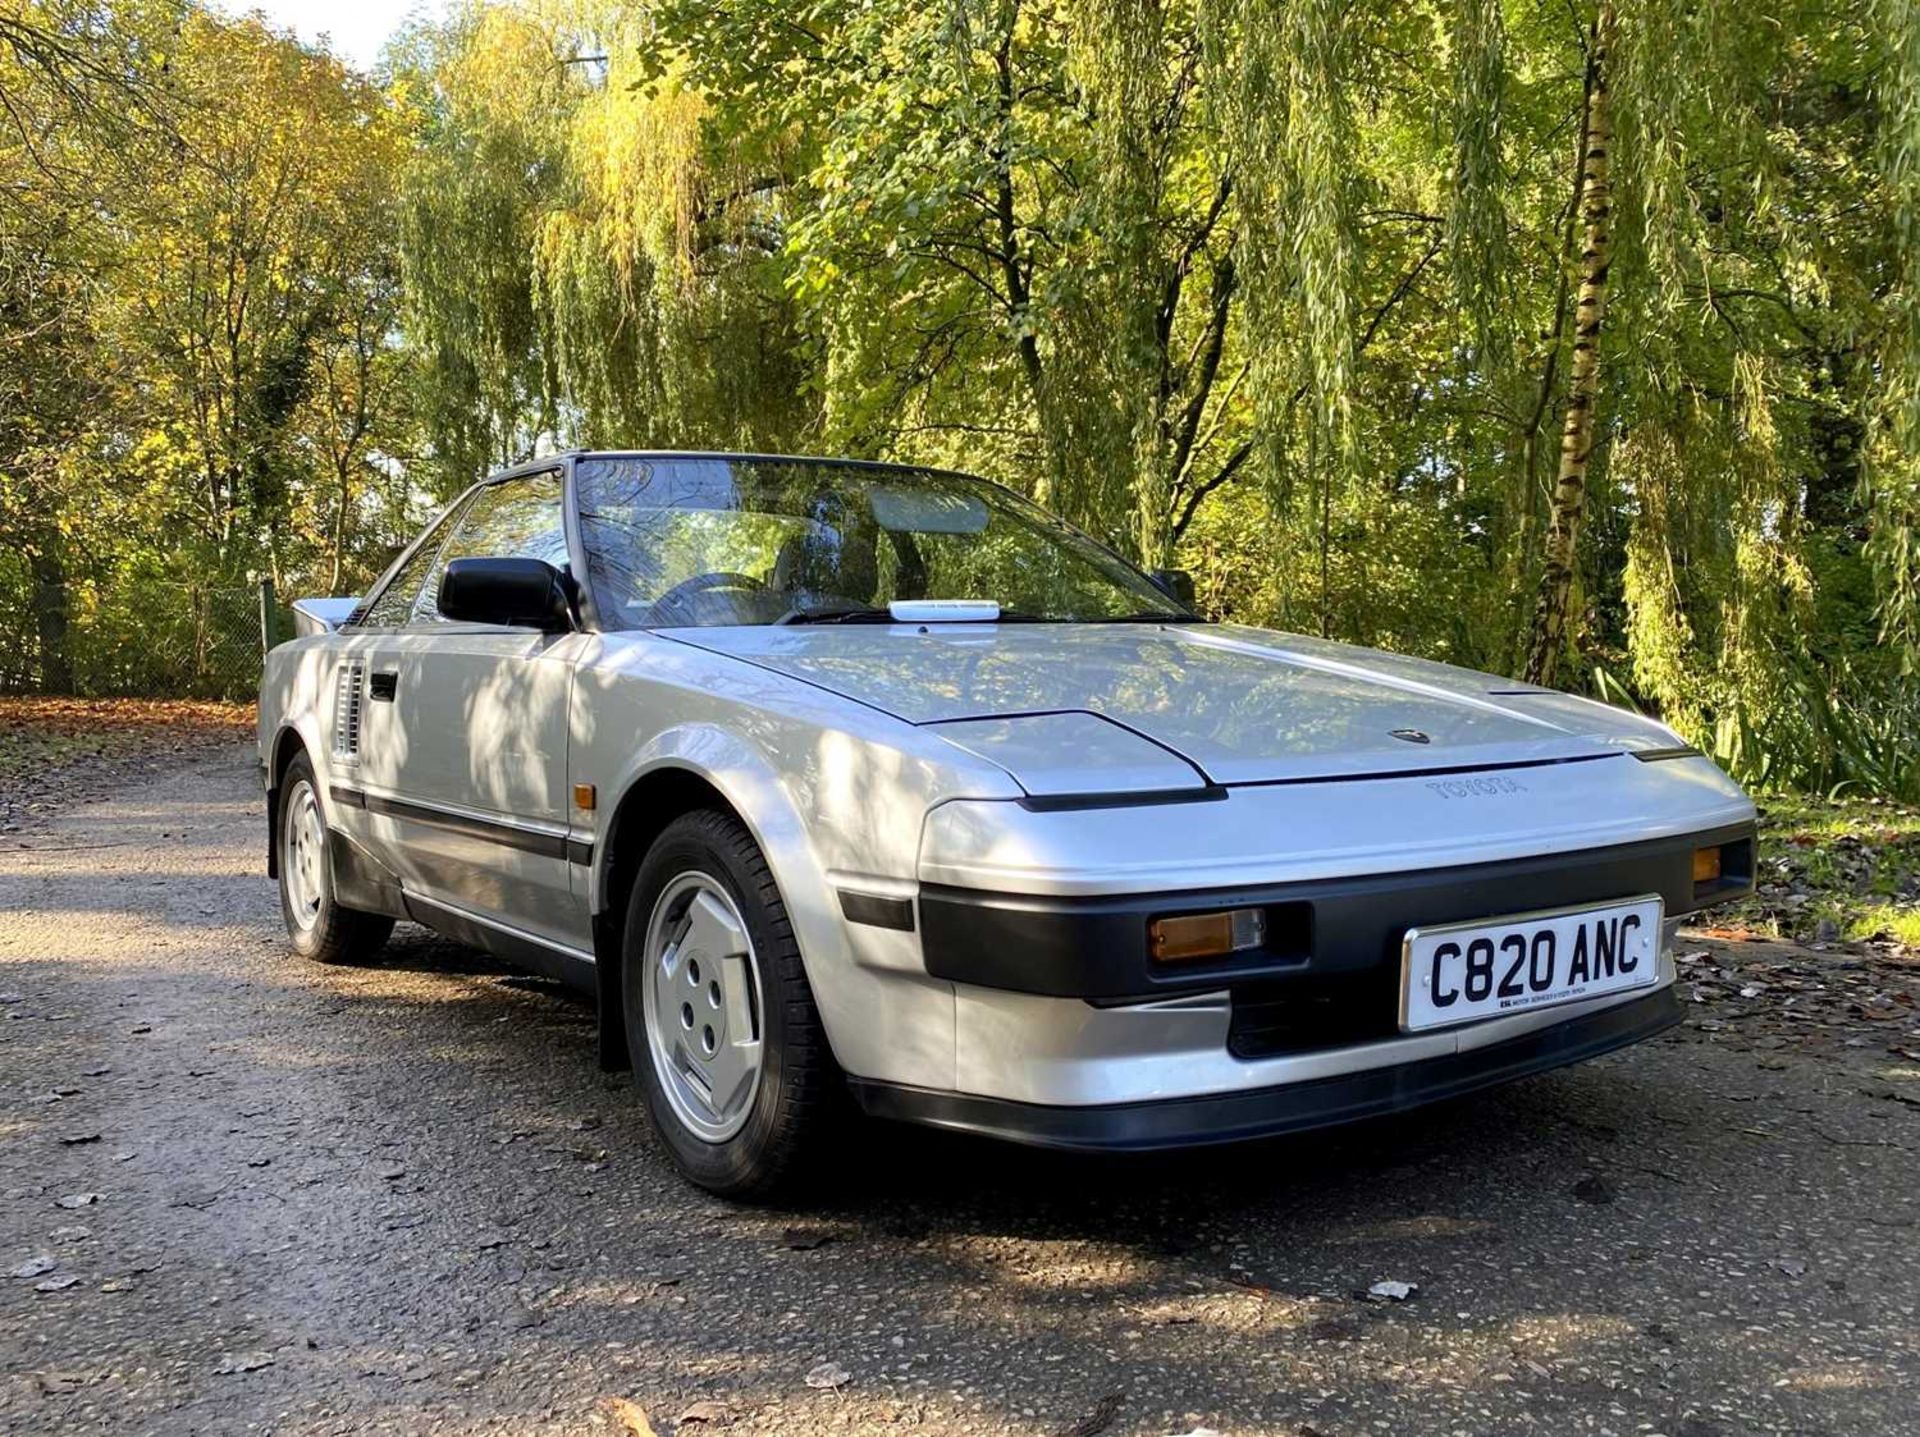 1985 Toyota MR2 Coupe Restored example of an appreciating modern classic